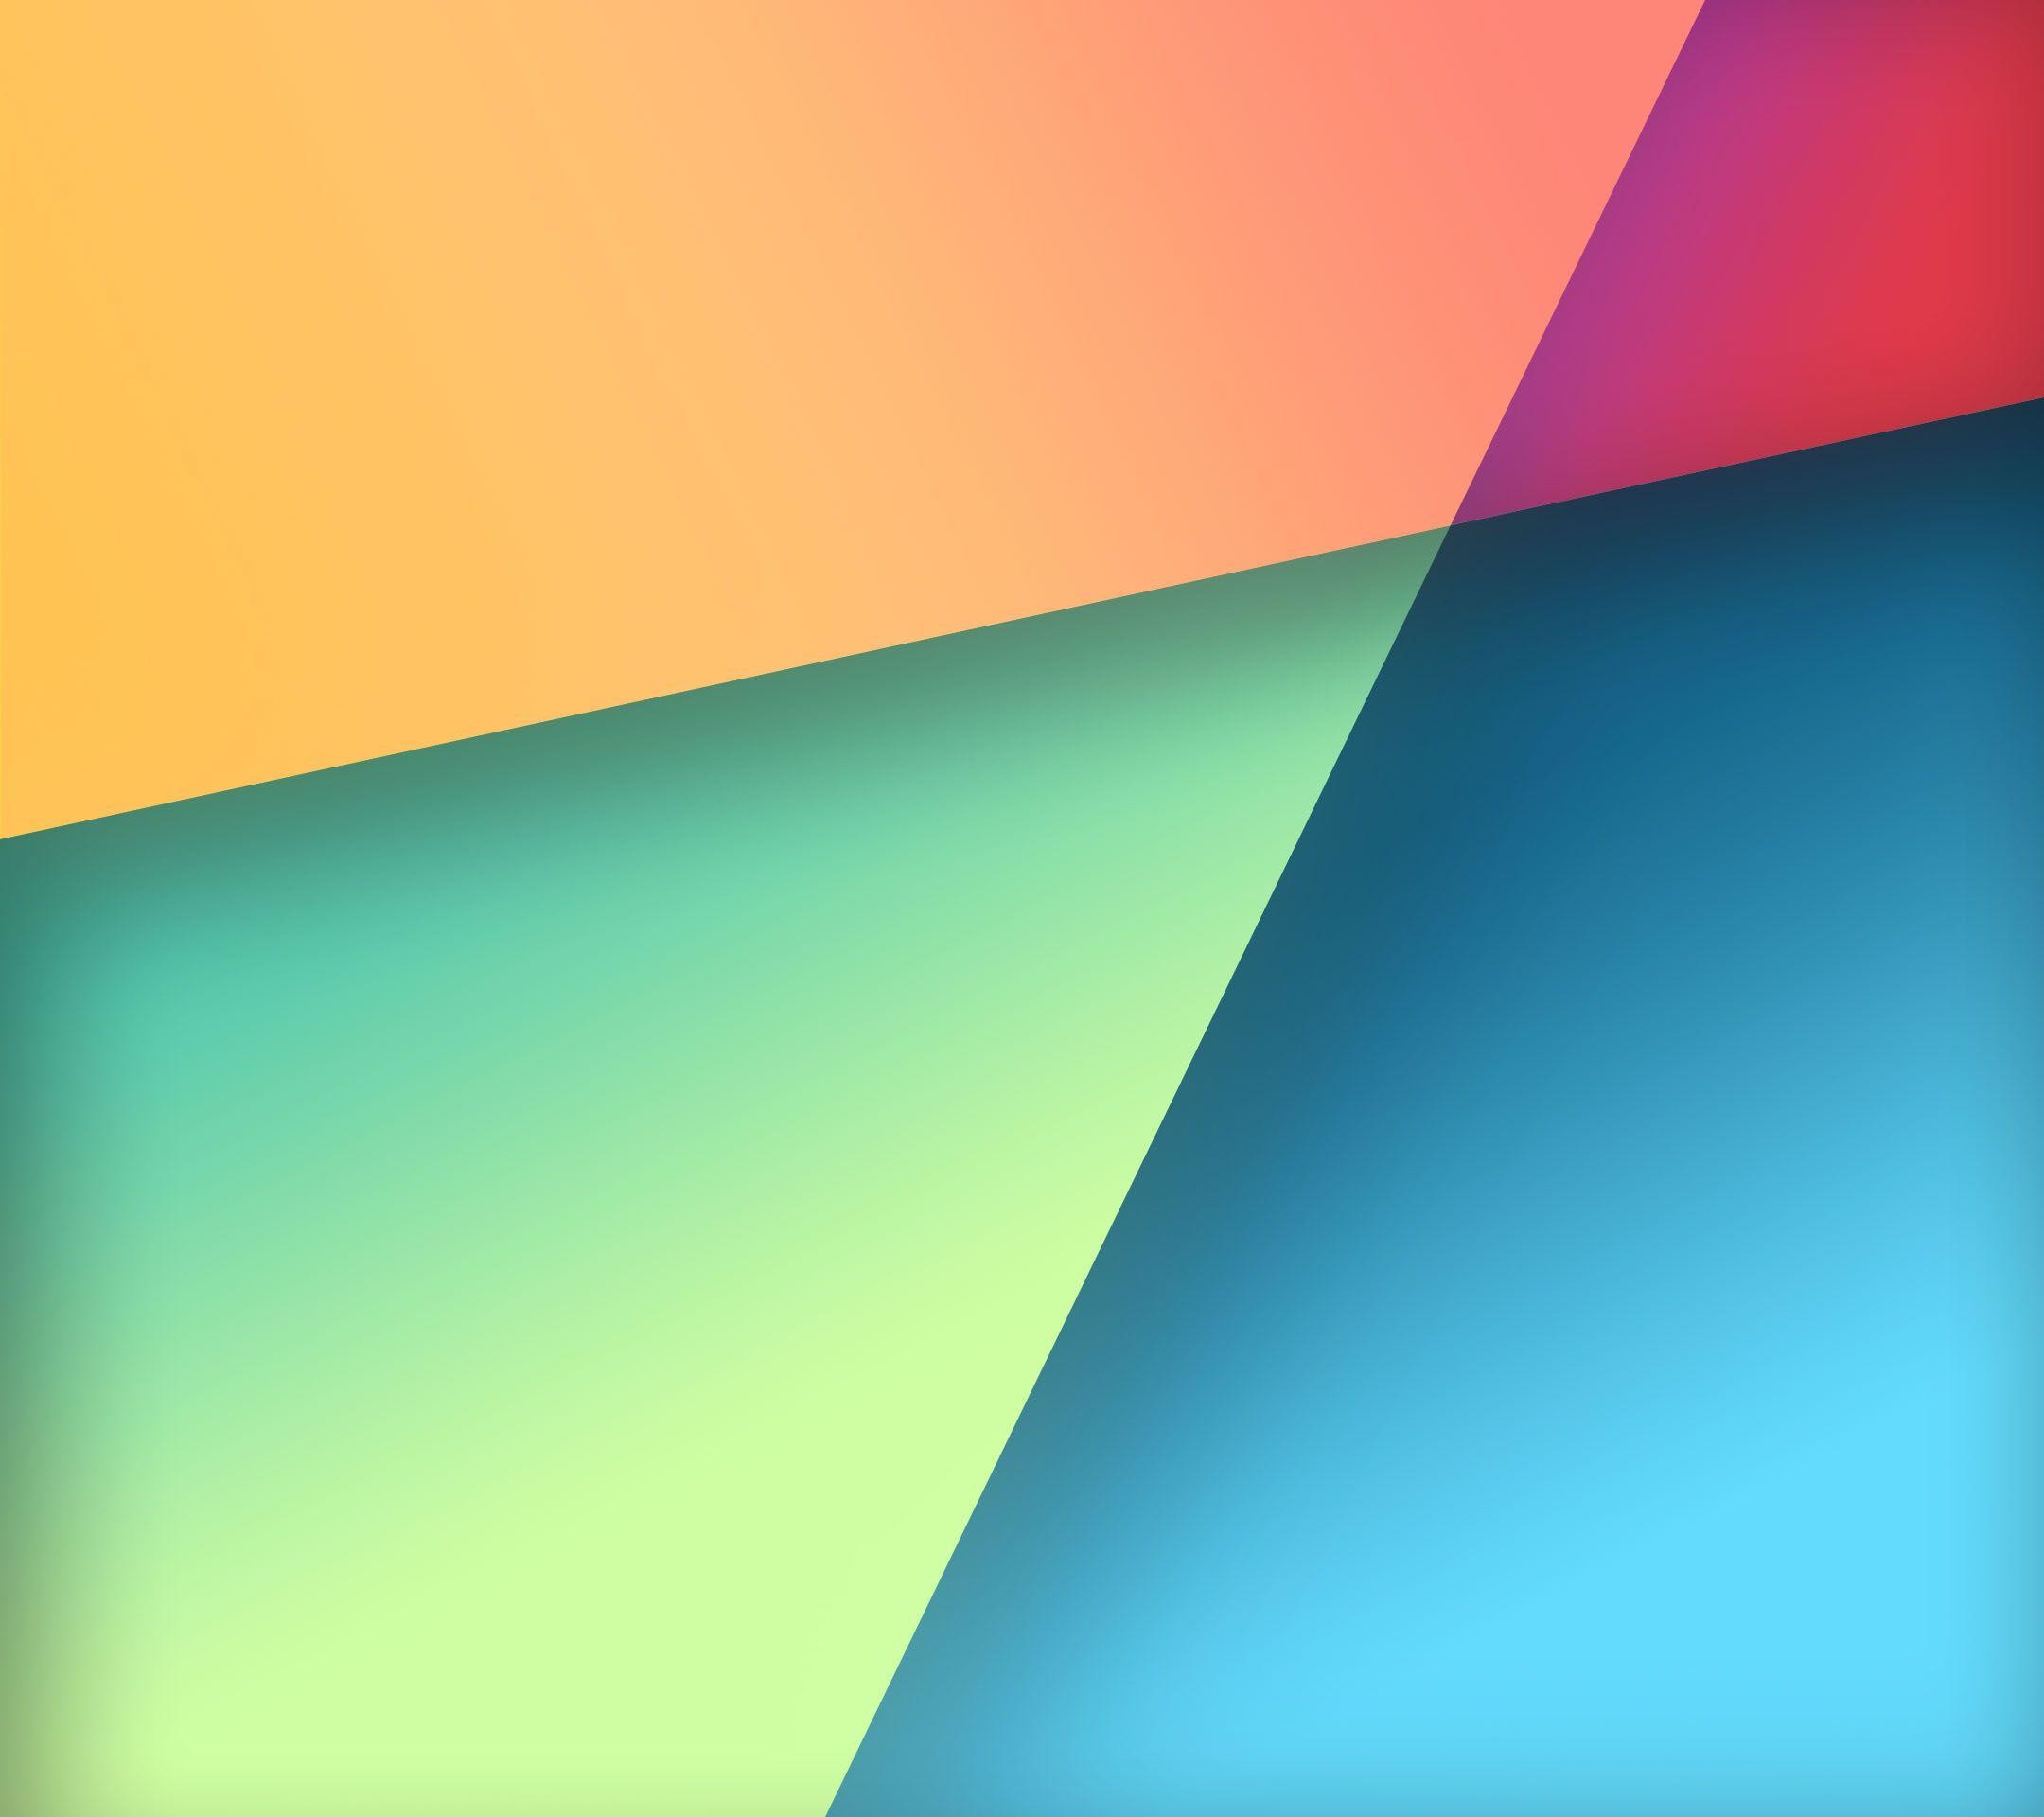 2160x1920 Nexus 7 Stock Wallpaper in Google Play Colors by R3CONN3R on .